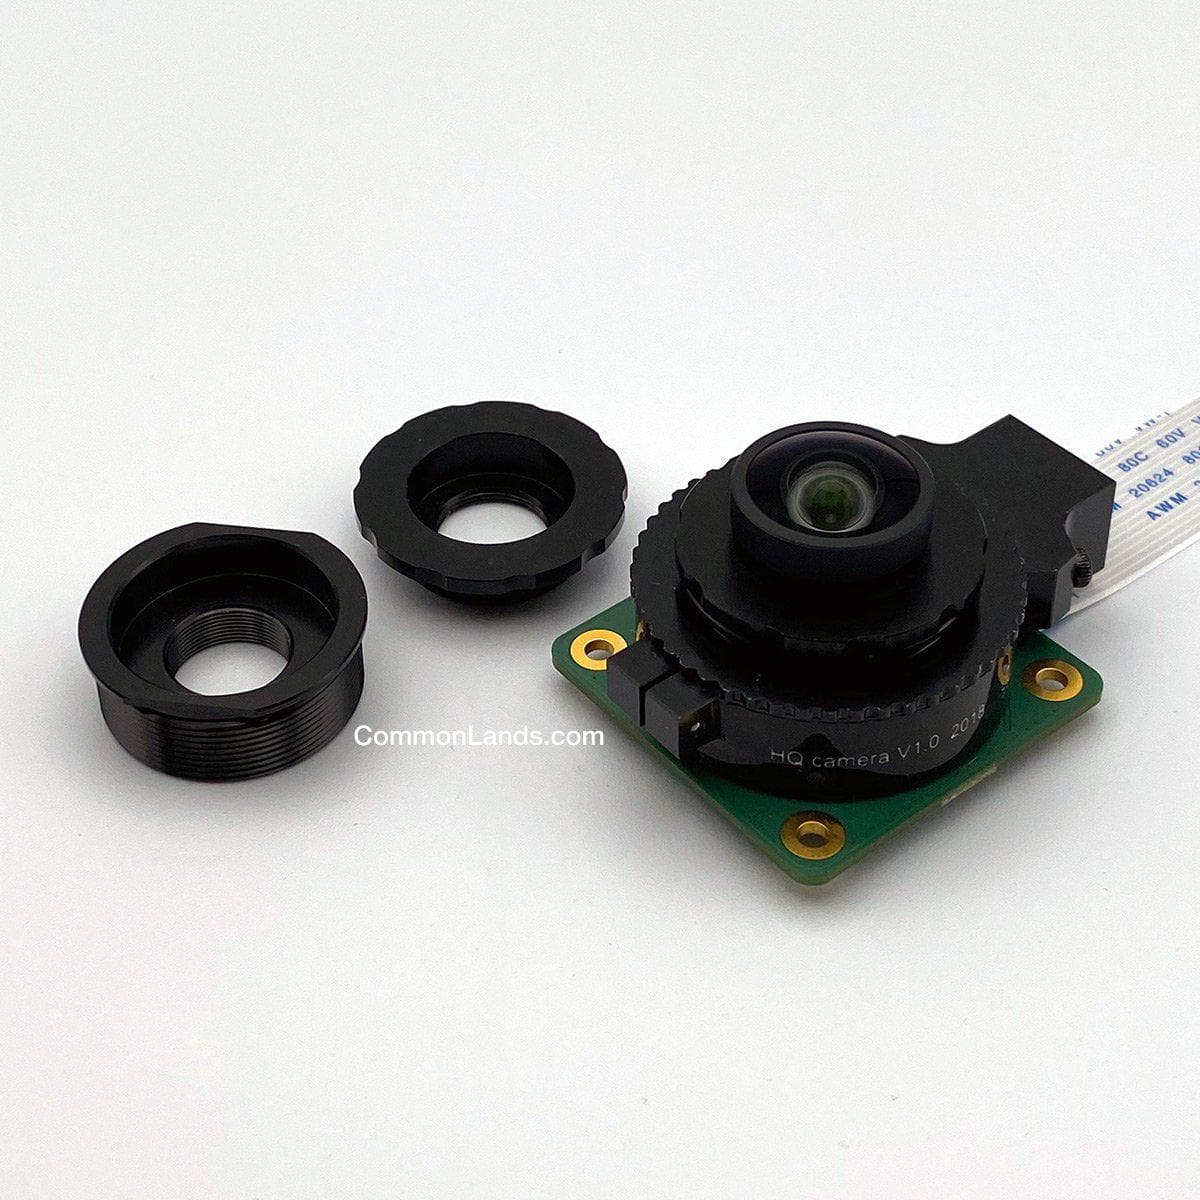 An M12 to CS mount adapter for S Mount Lenses and the Raspberry Pi High Quality.